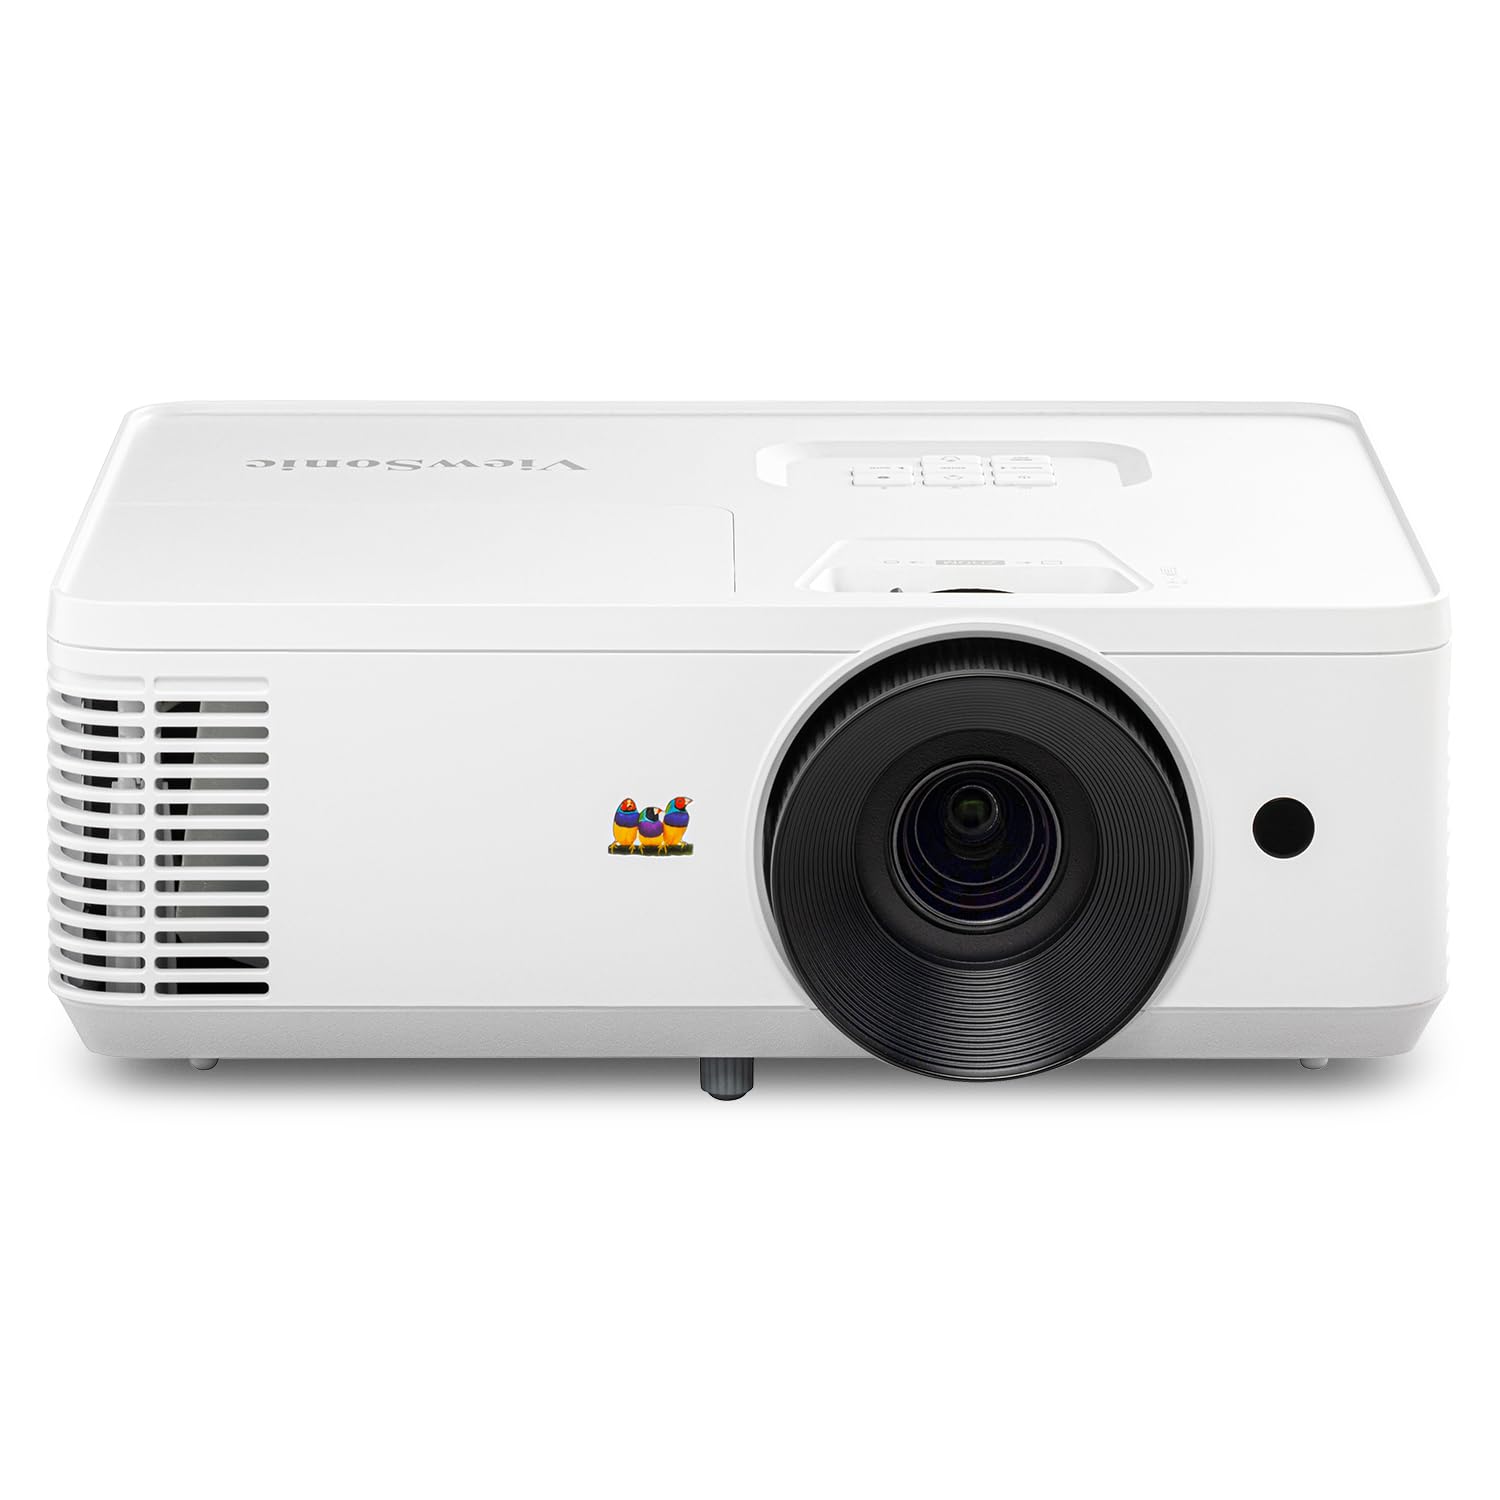 ViewSonic PA503HD 4000 Lumens High Brightness Projector with 1.1x Optical Zoom, USB, and HDMI inputs for Home and Office